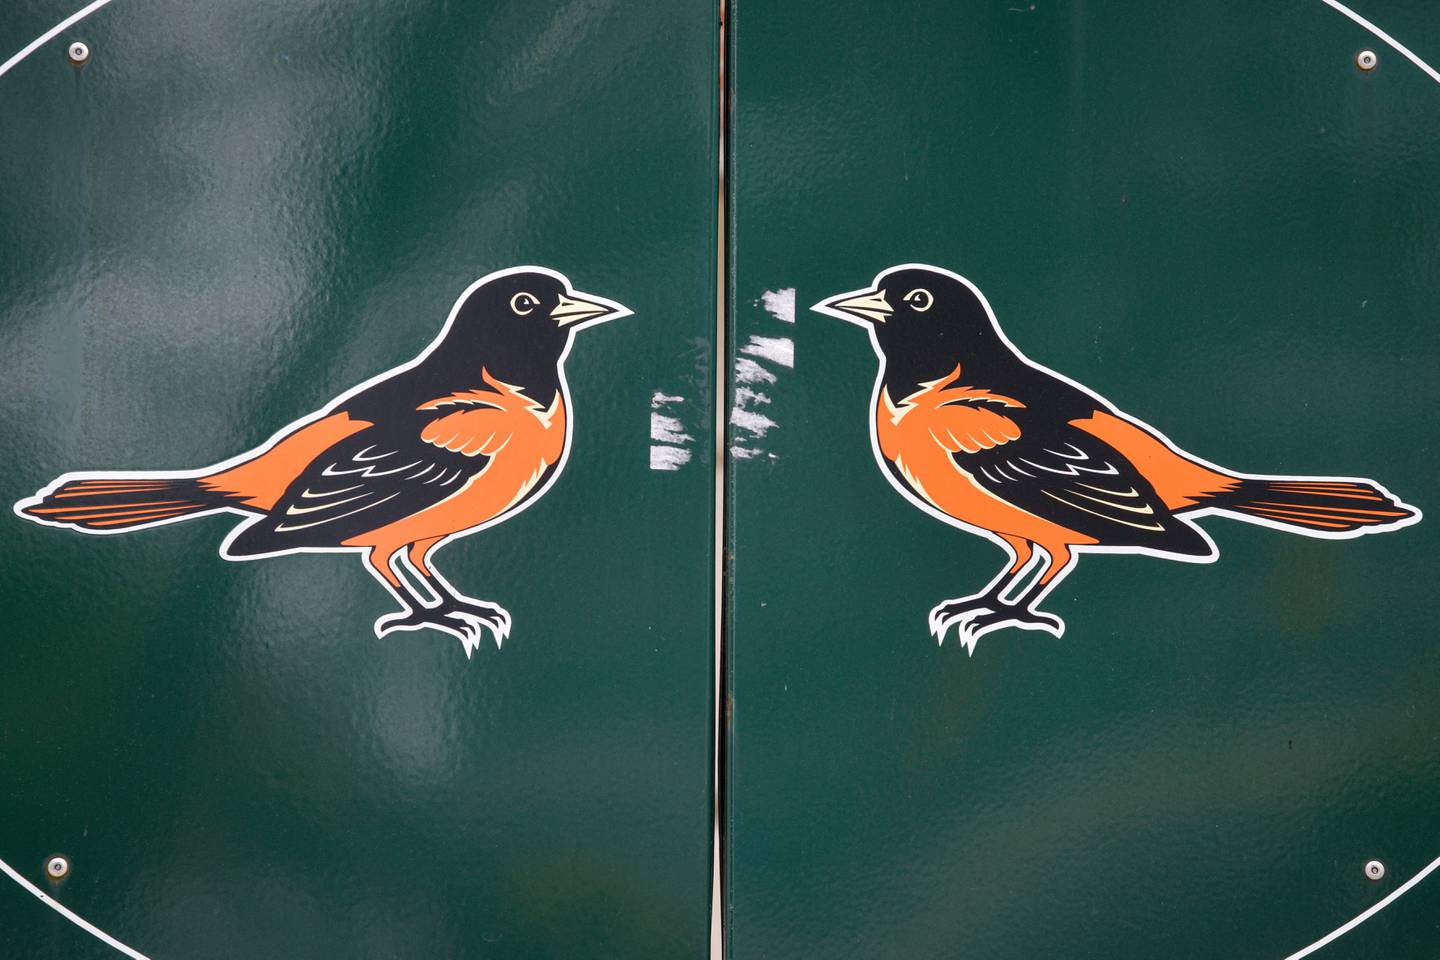 Baltimore Orioles logos are painted on an exterior gate of Oriole Park at Camden Yards in South Baltimore.